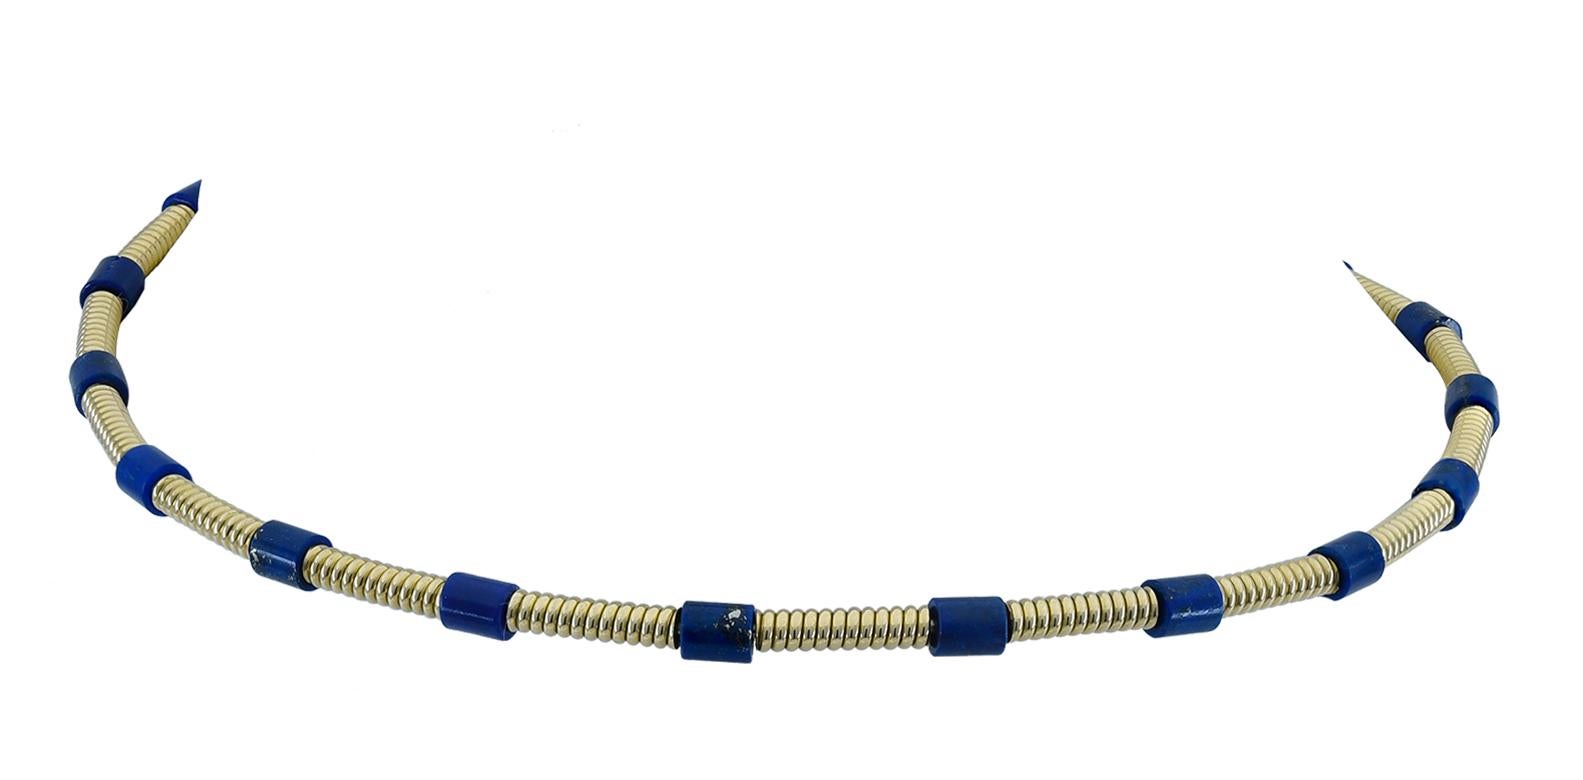 Very smart flexible choker.  Made and signed by CARTIER.  18K yellow gold, set with lapis stations.  User friendly, easy and comfortable to wear.  An ultra-chic accent.  

Alice Kwartler has sold the finest antique gold and diamond jewelry and